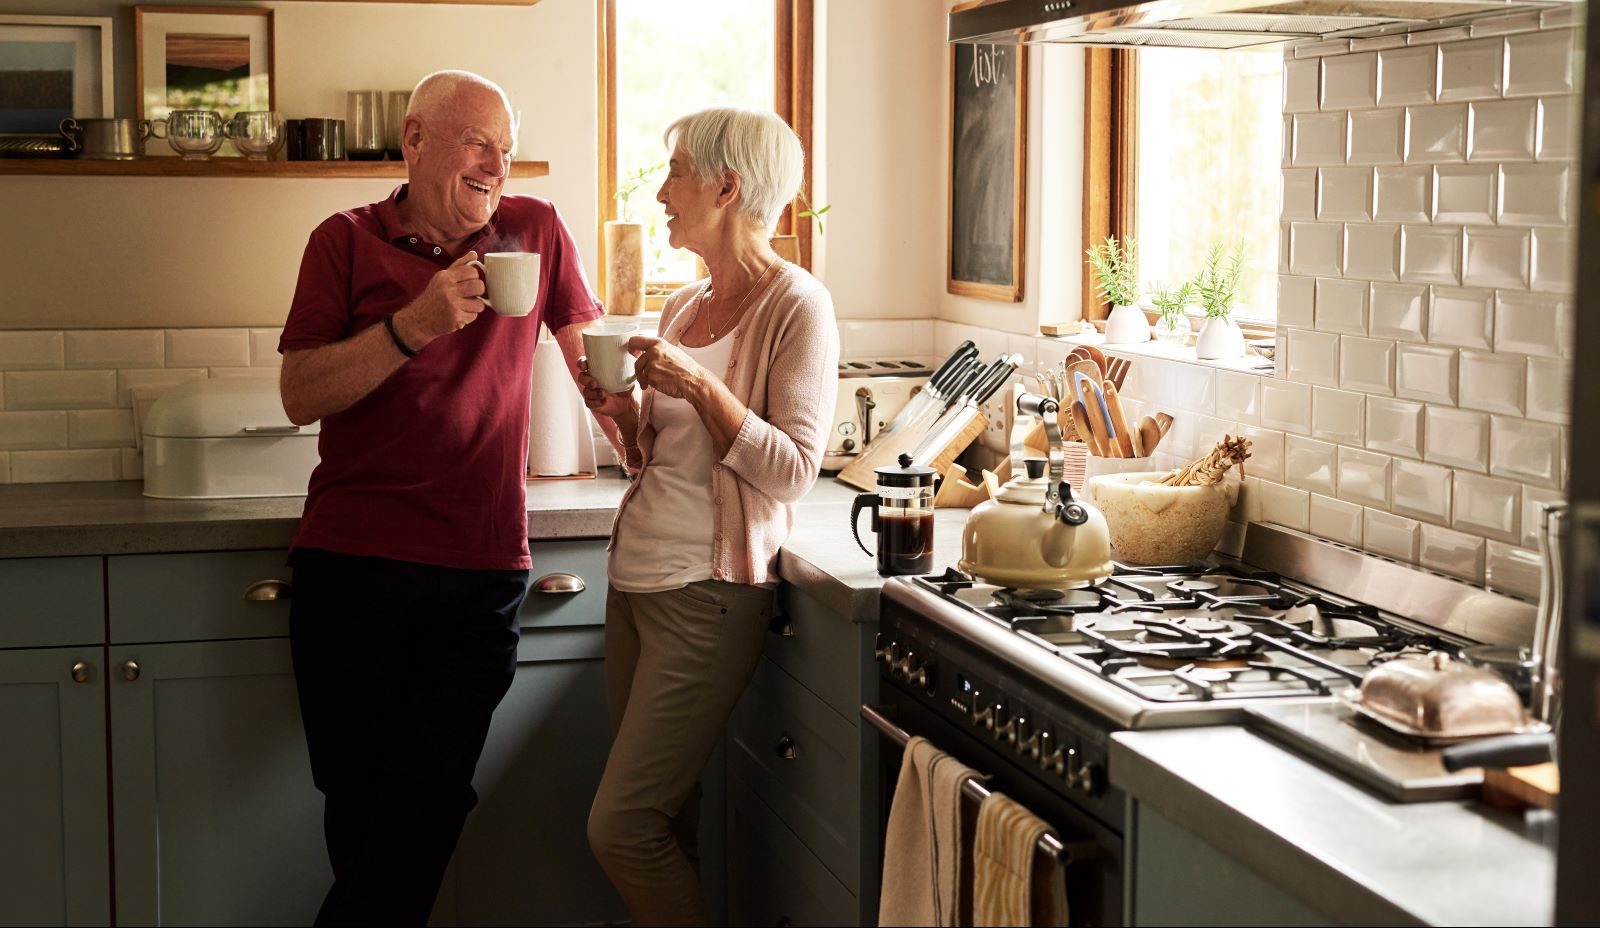 The home safety solutions program helps seniors stay safe and comfortable in their own homes.